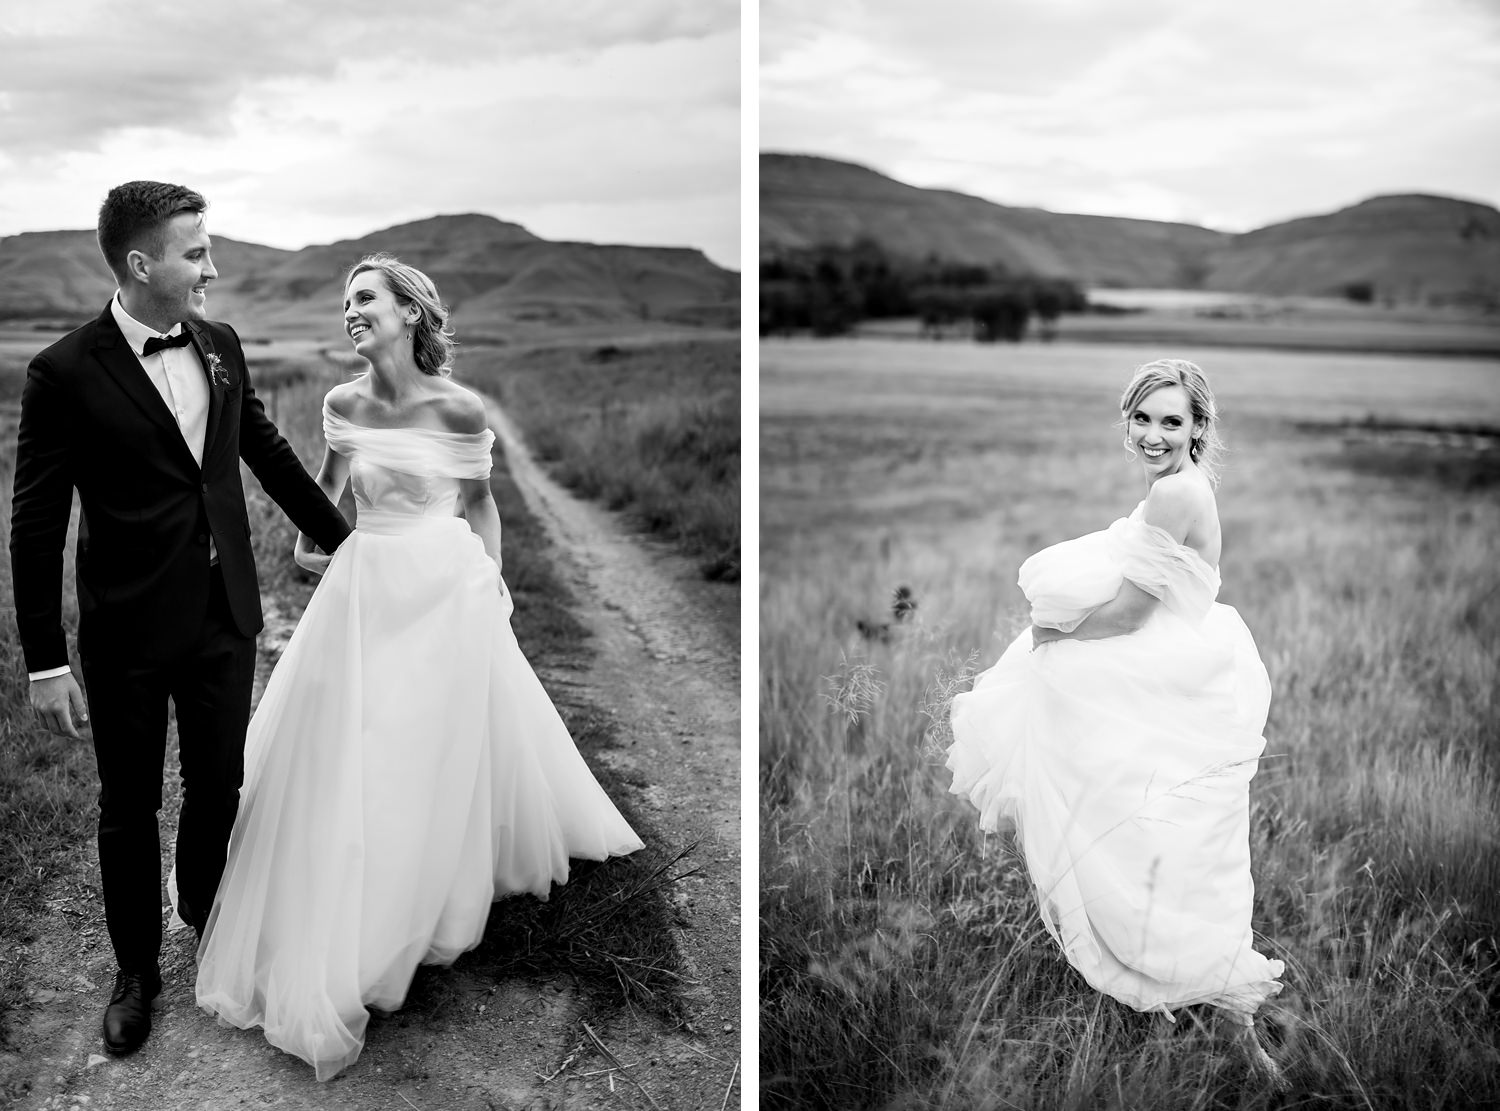 Black and white images of a bride and groom at the Drakensberg wedding